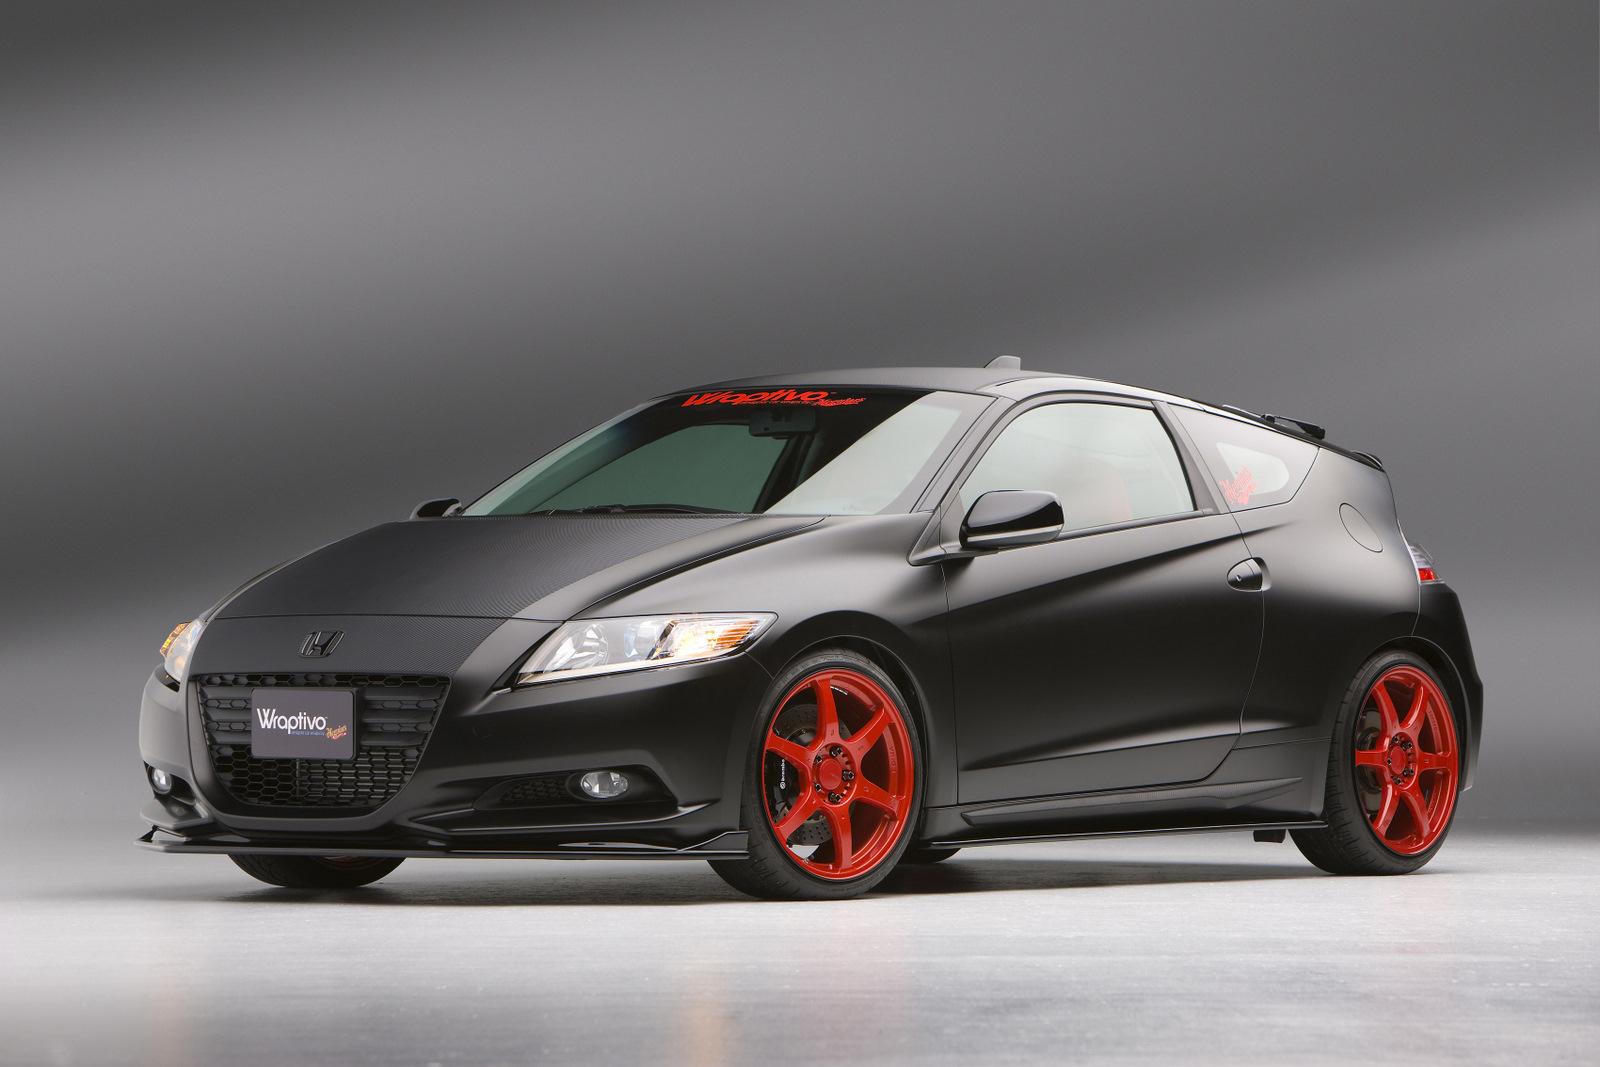 Honda CR-Z at SEMA (2010) - 78 HD pictures of this model. 